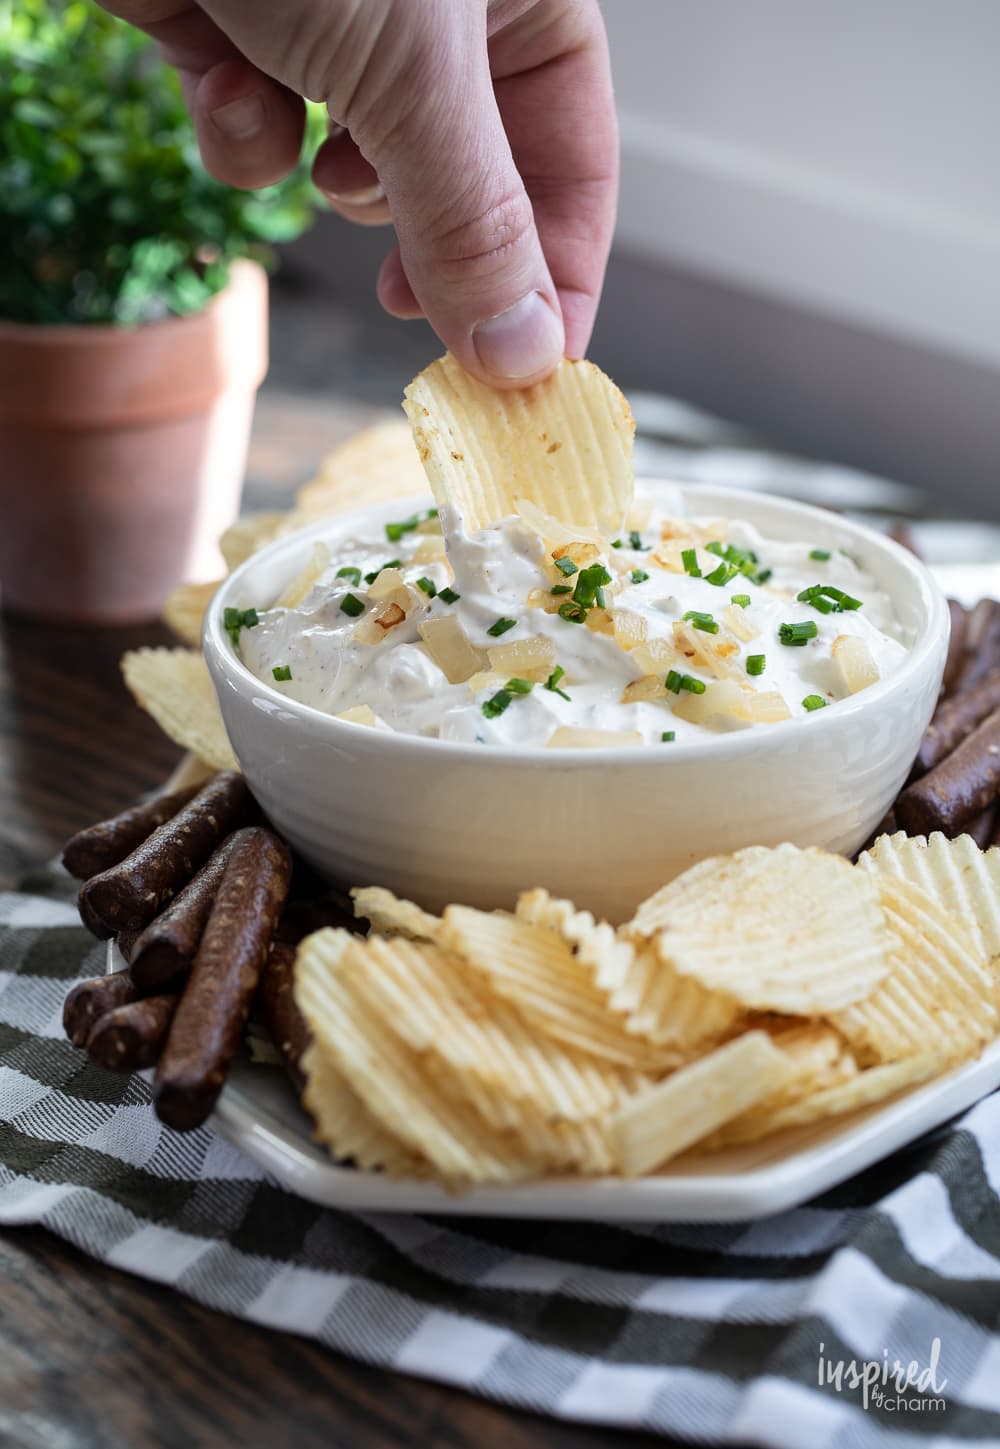 hand dipping into sour cream and onion dip in a bowl with potato chips and pretzels.